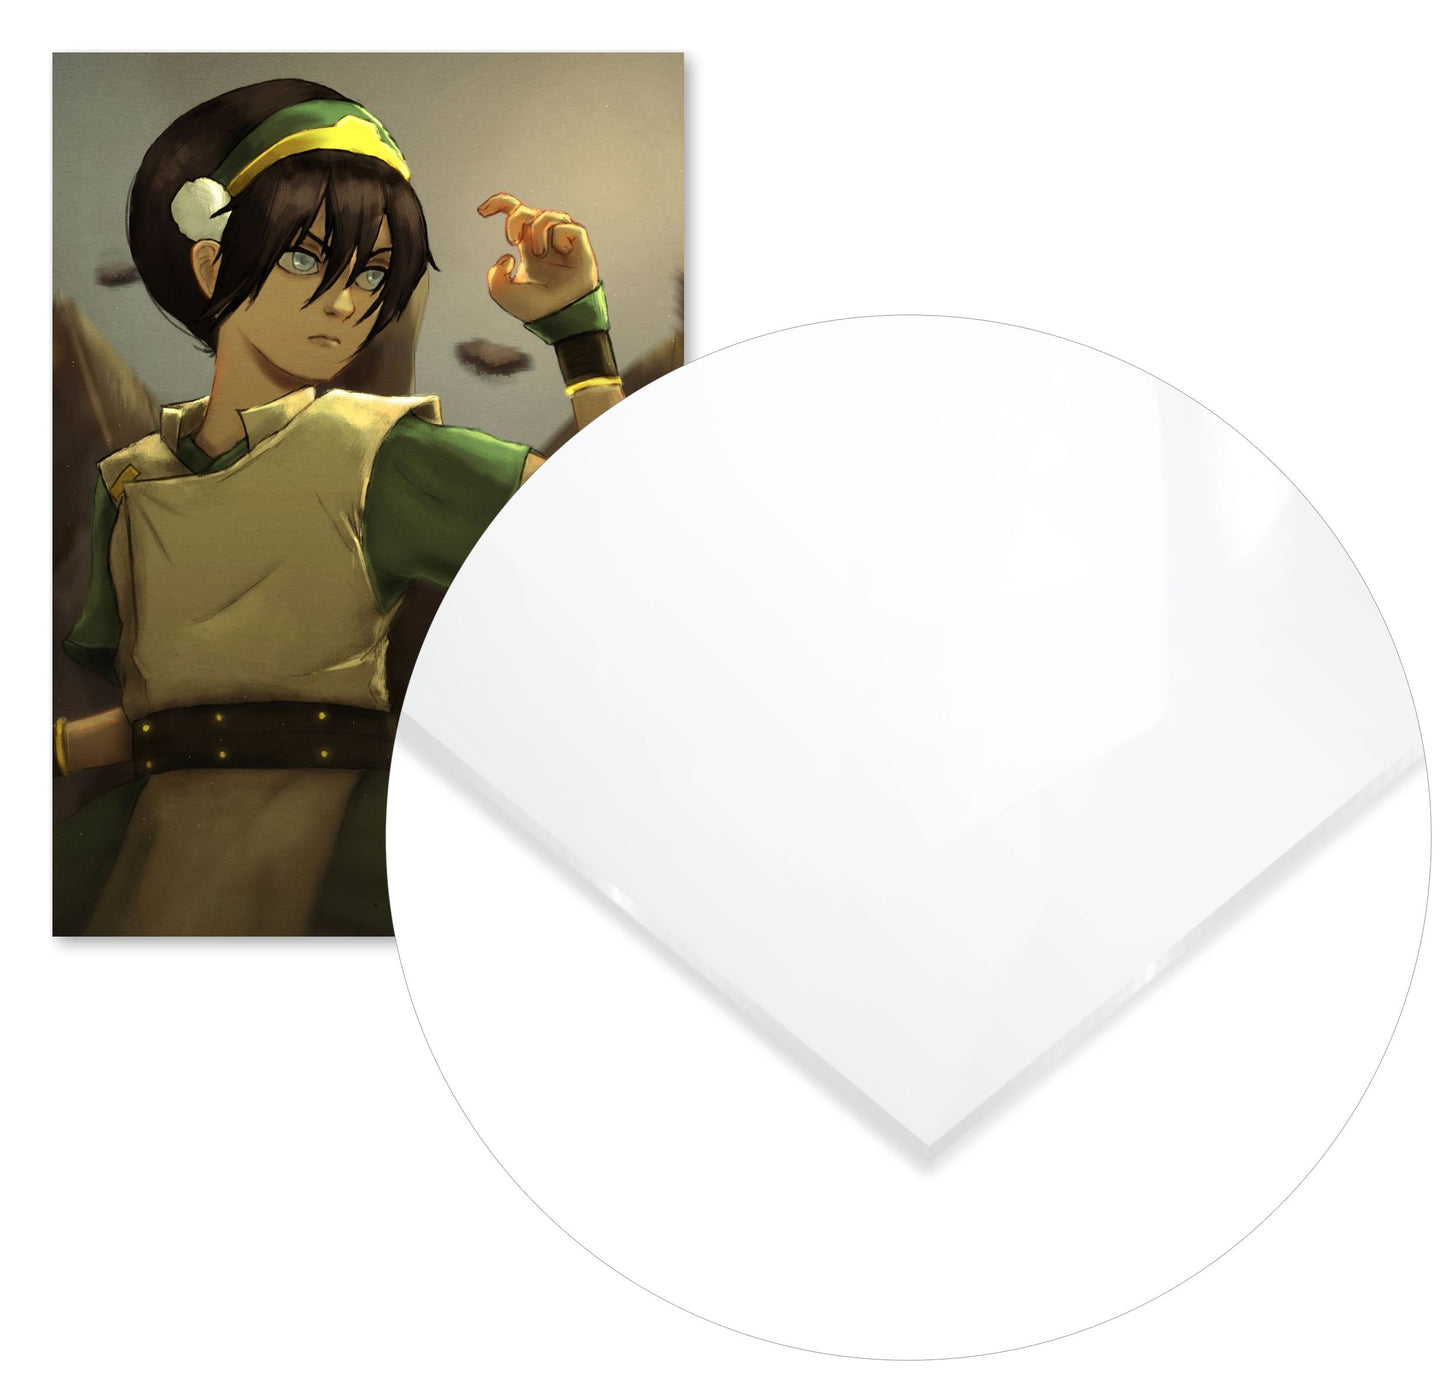 Toph - @LordCreative